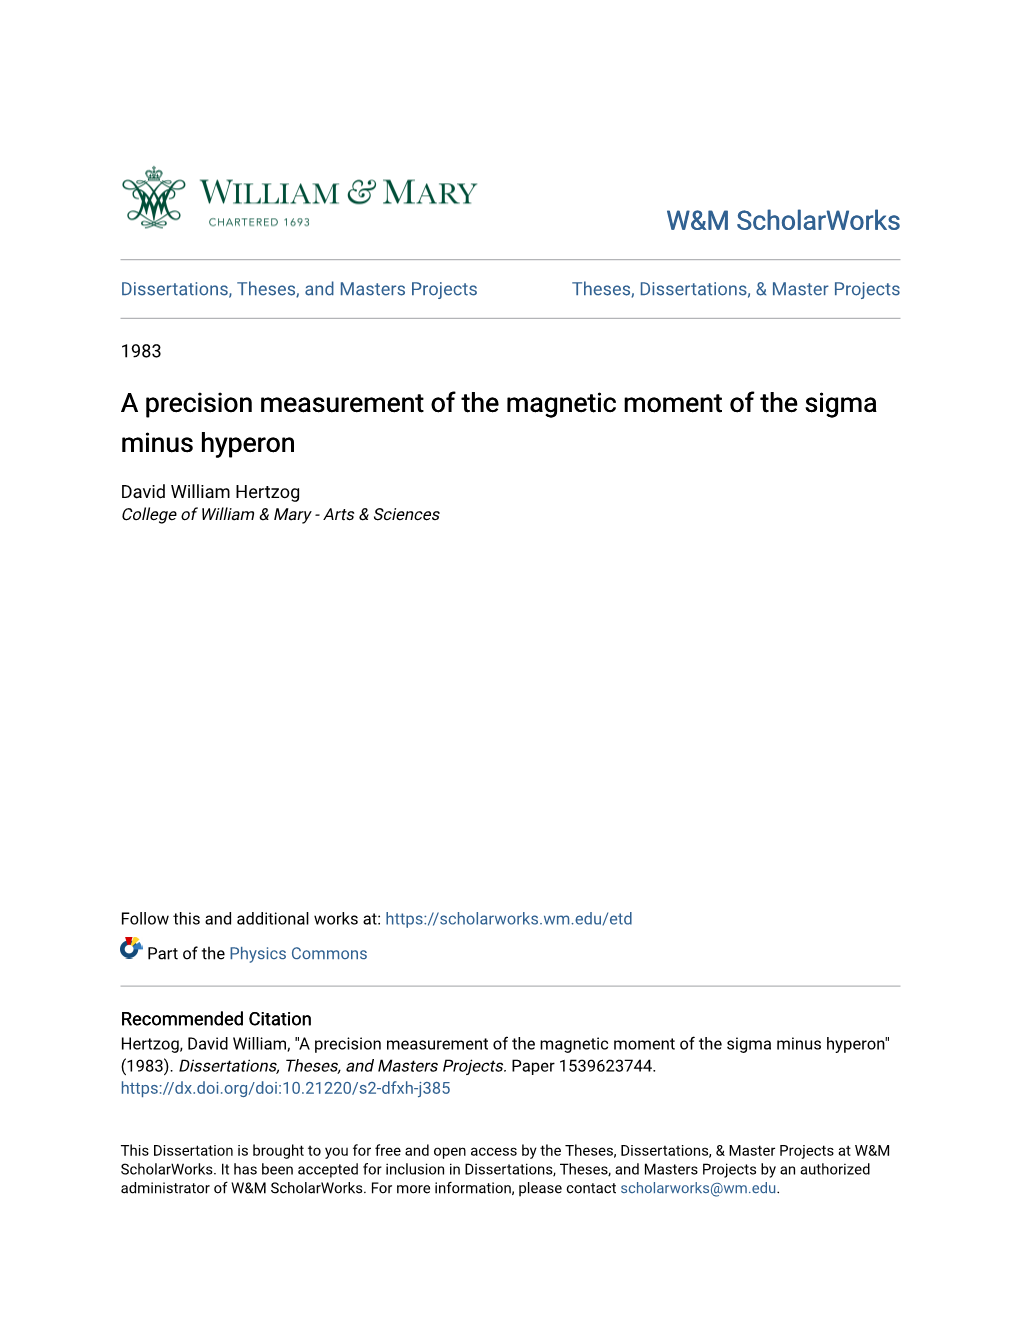 A Precision Measurement of the Magnetic Moment of the Sigma Minus Hyperon